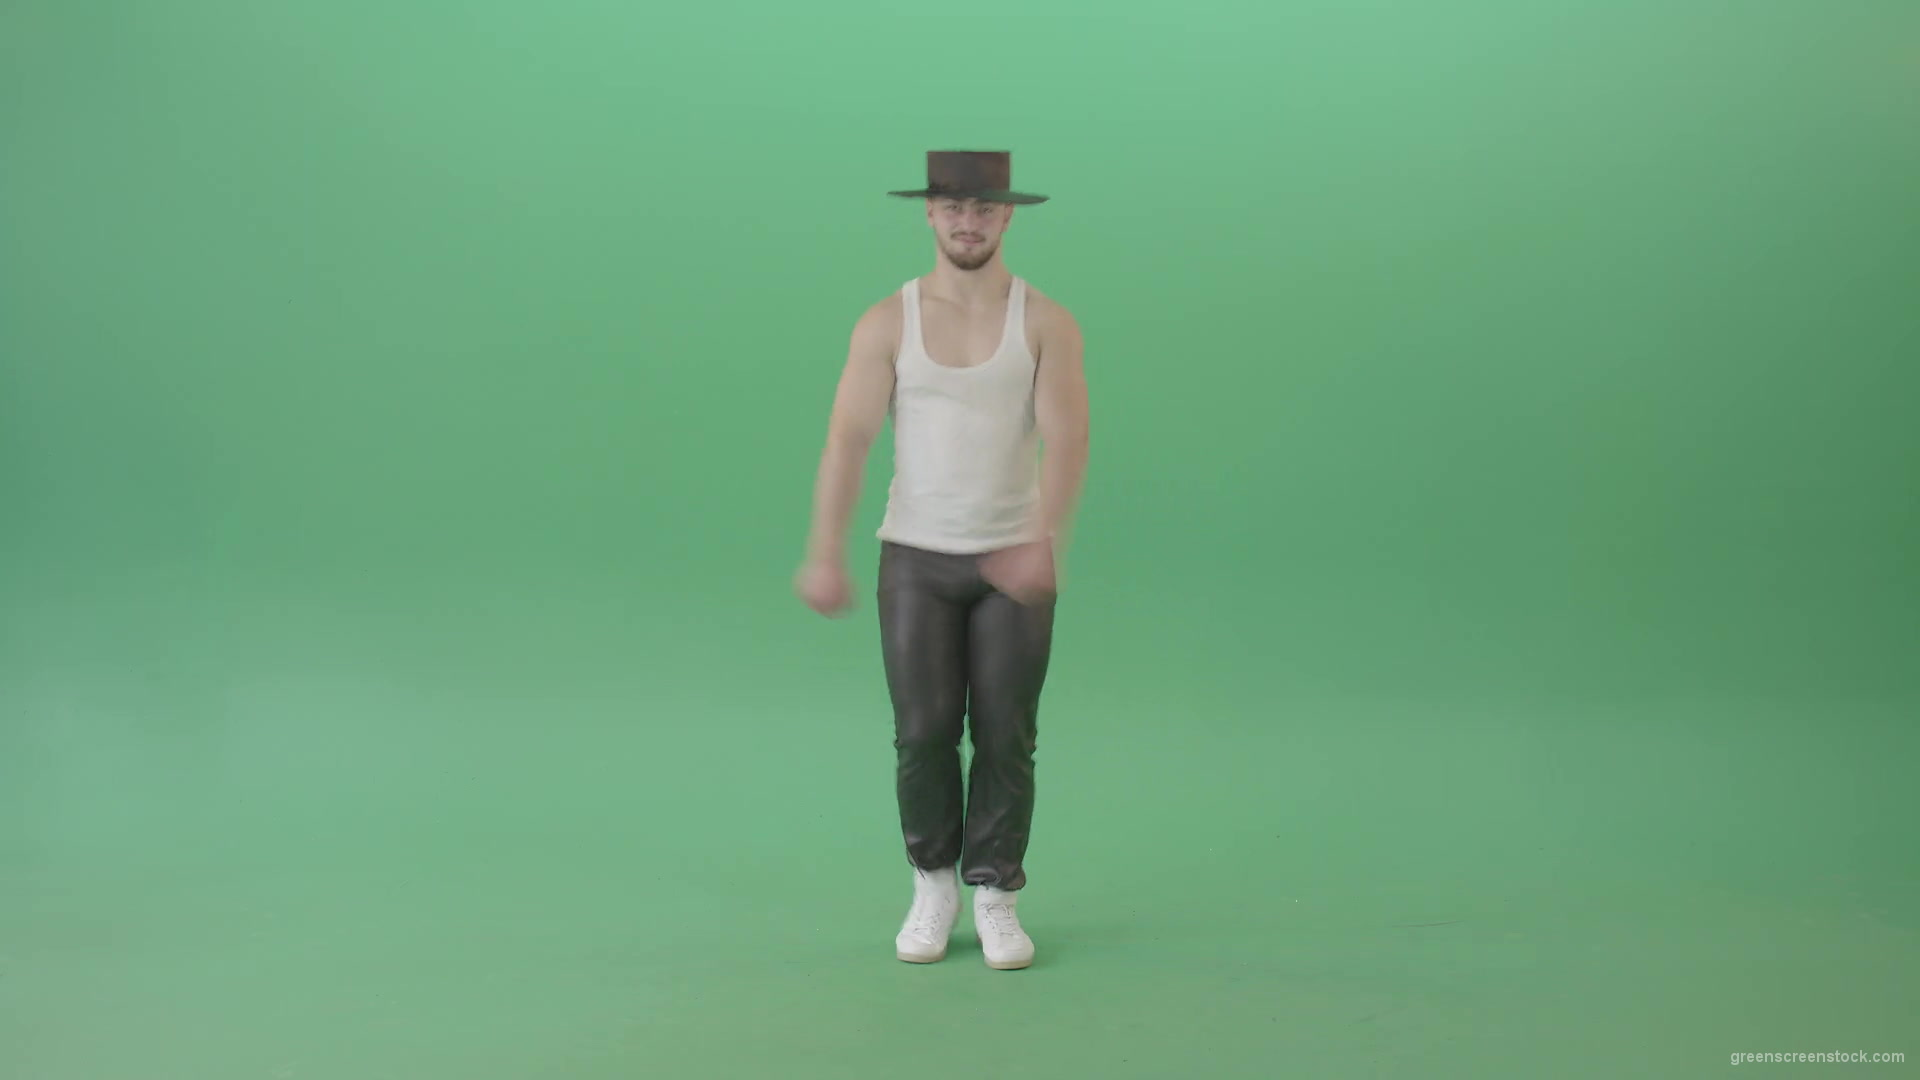 Funny-Man-marching-in-beat-isolated-on-Green-Screen-Chroma-Key-4K-Video-Footage-1920_007 Green Screen Stock